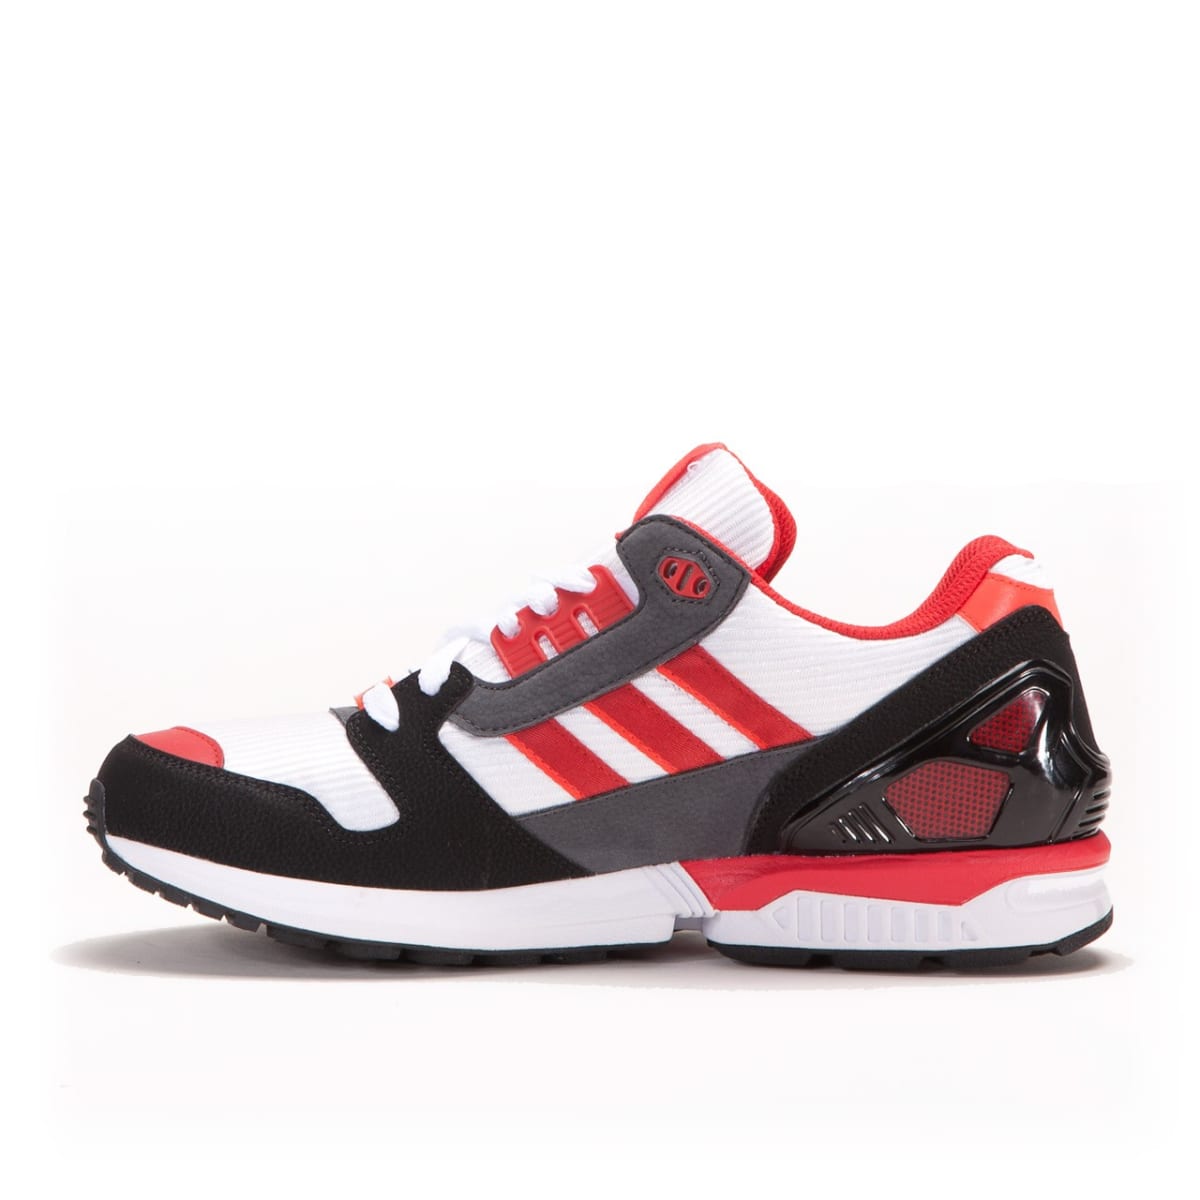 adidas ZX 8000 | Adidas | Sneaker News, Launches, Release Dates 